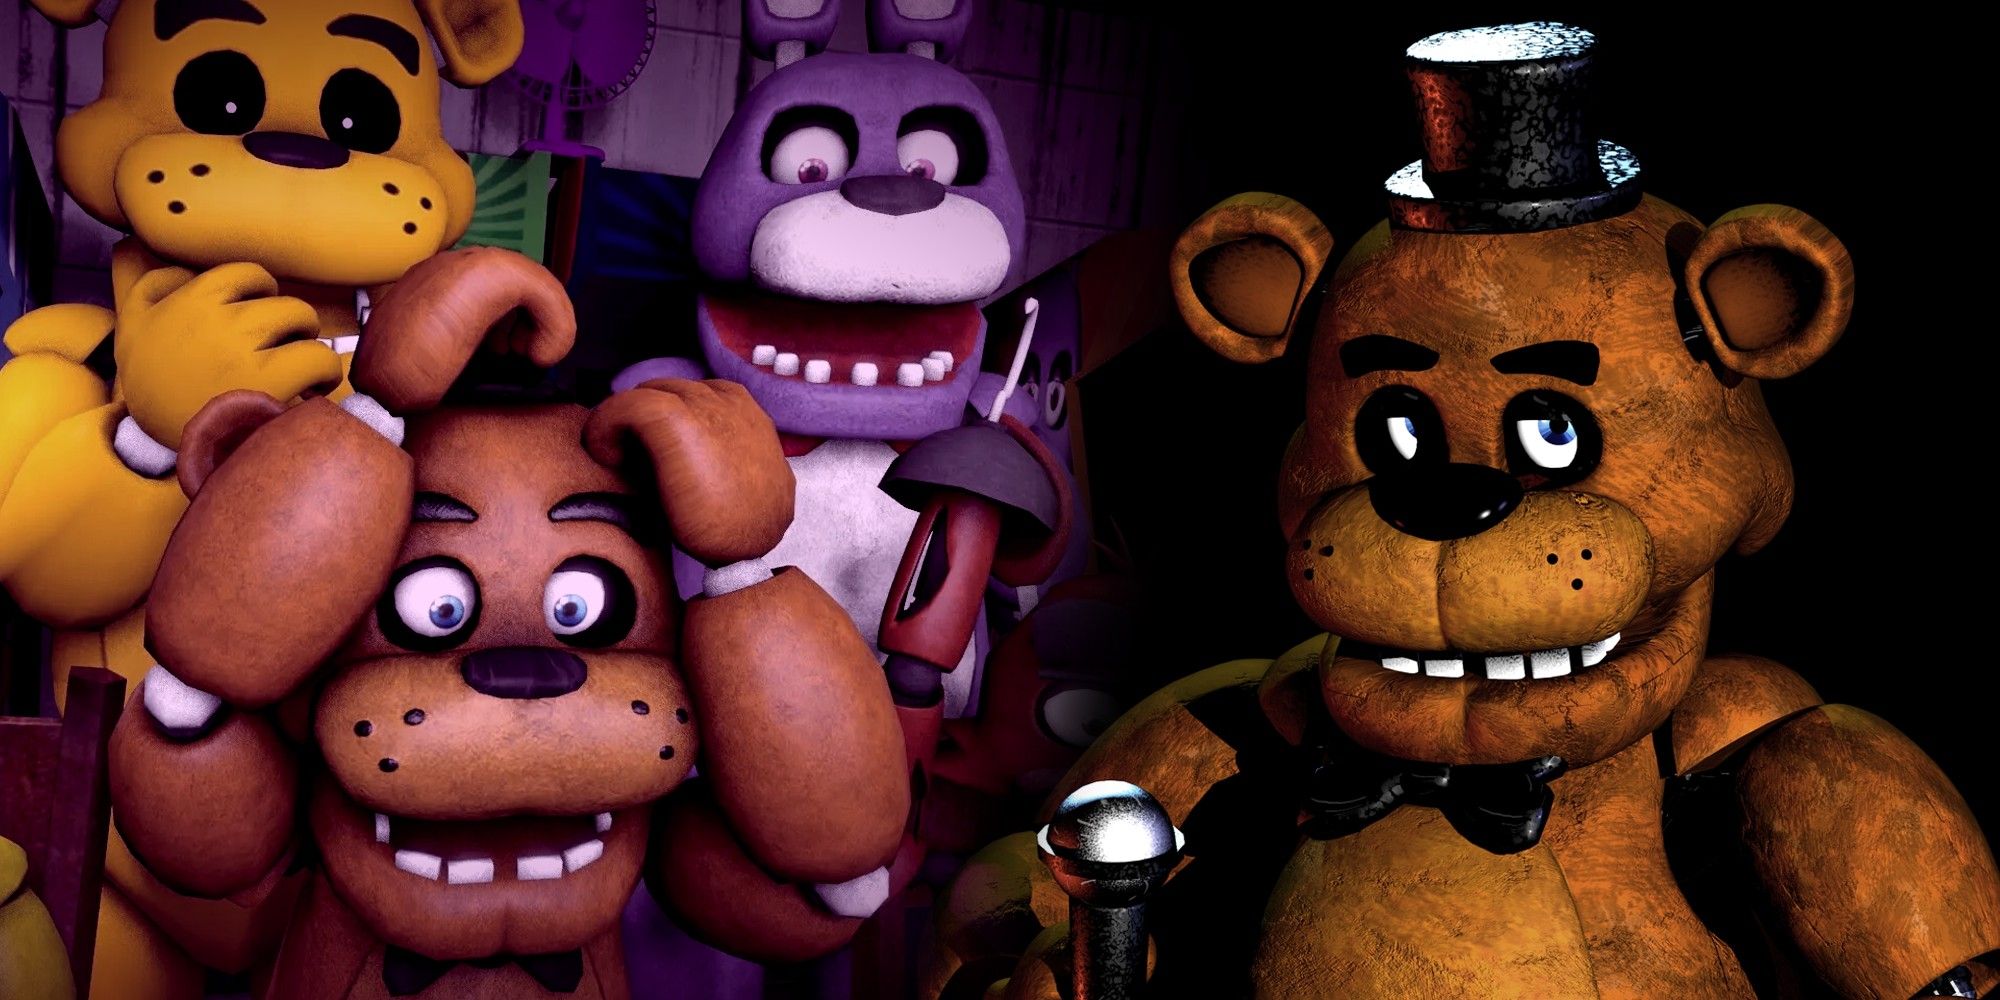 Why Five Nights at Freddy's Practical Animatronics Were Necessary